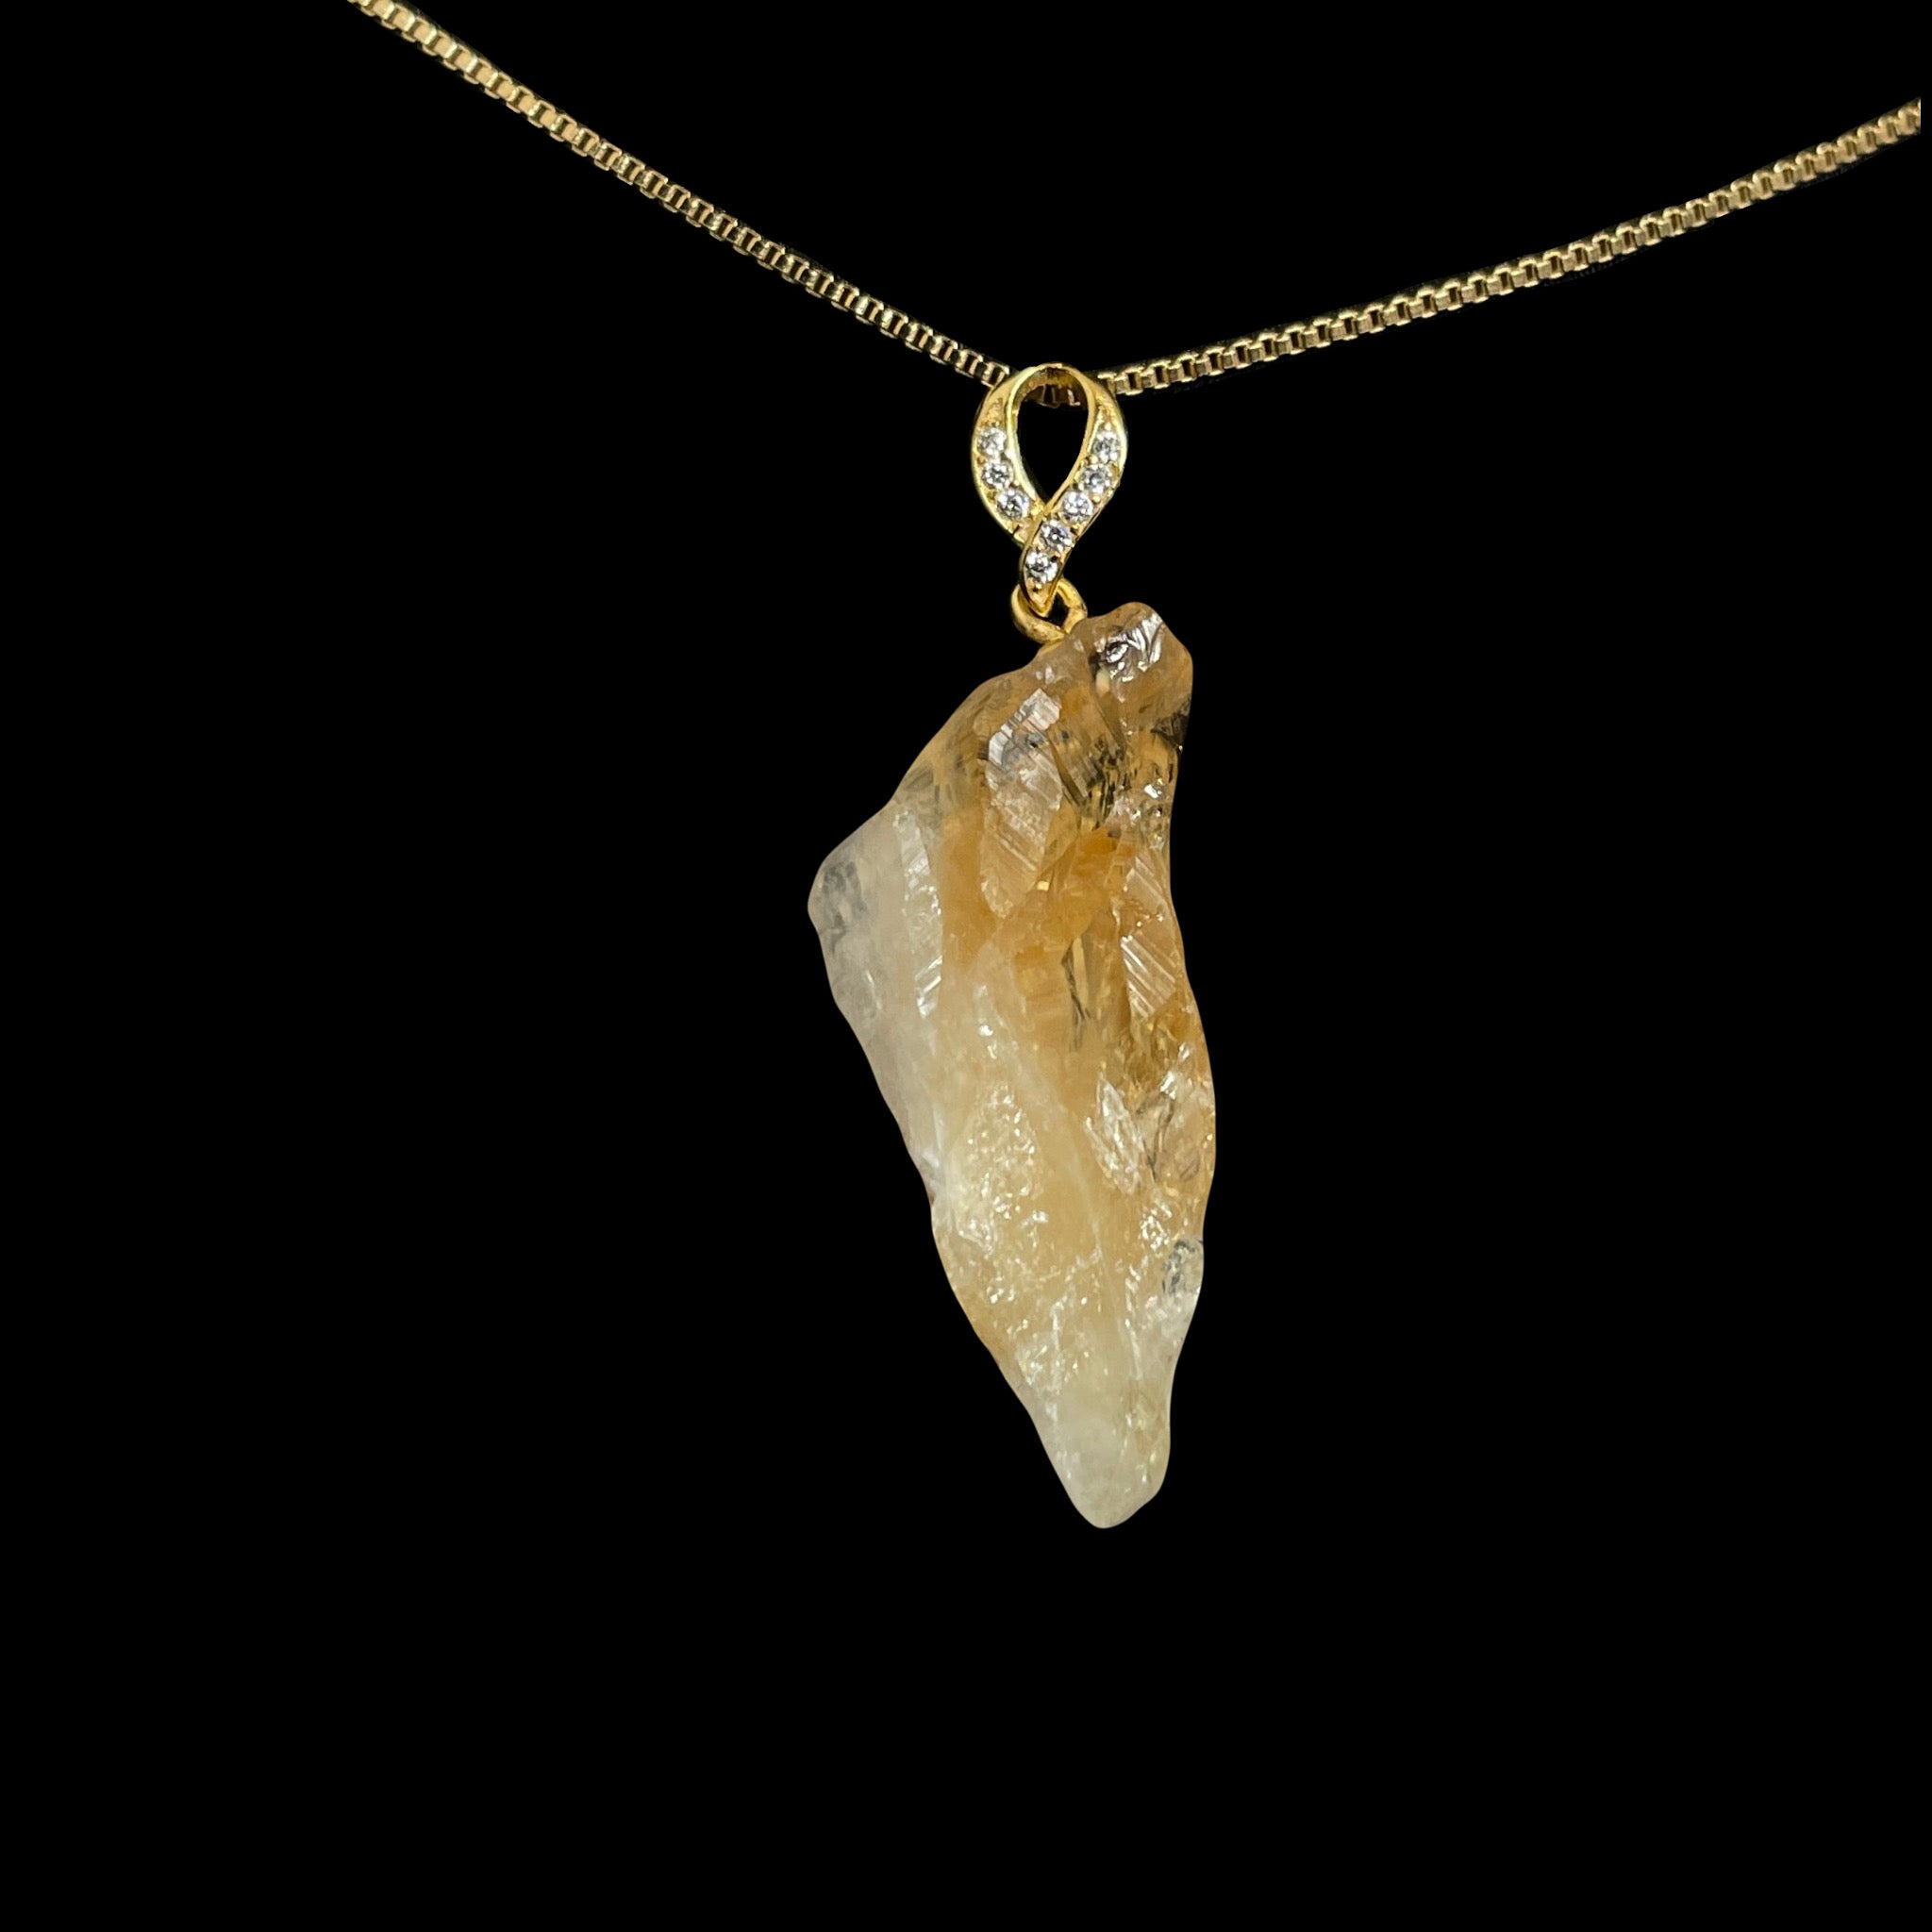 Citrine, 18k Gold Filled, Box Chain Necklace